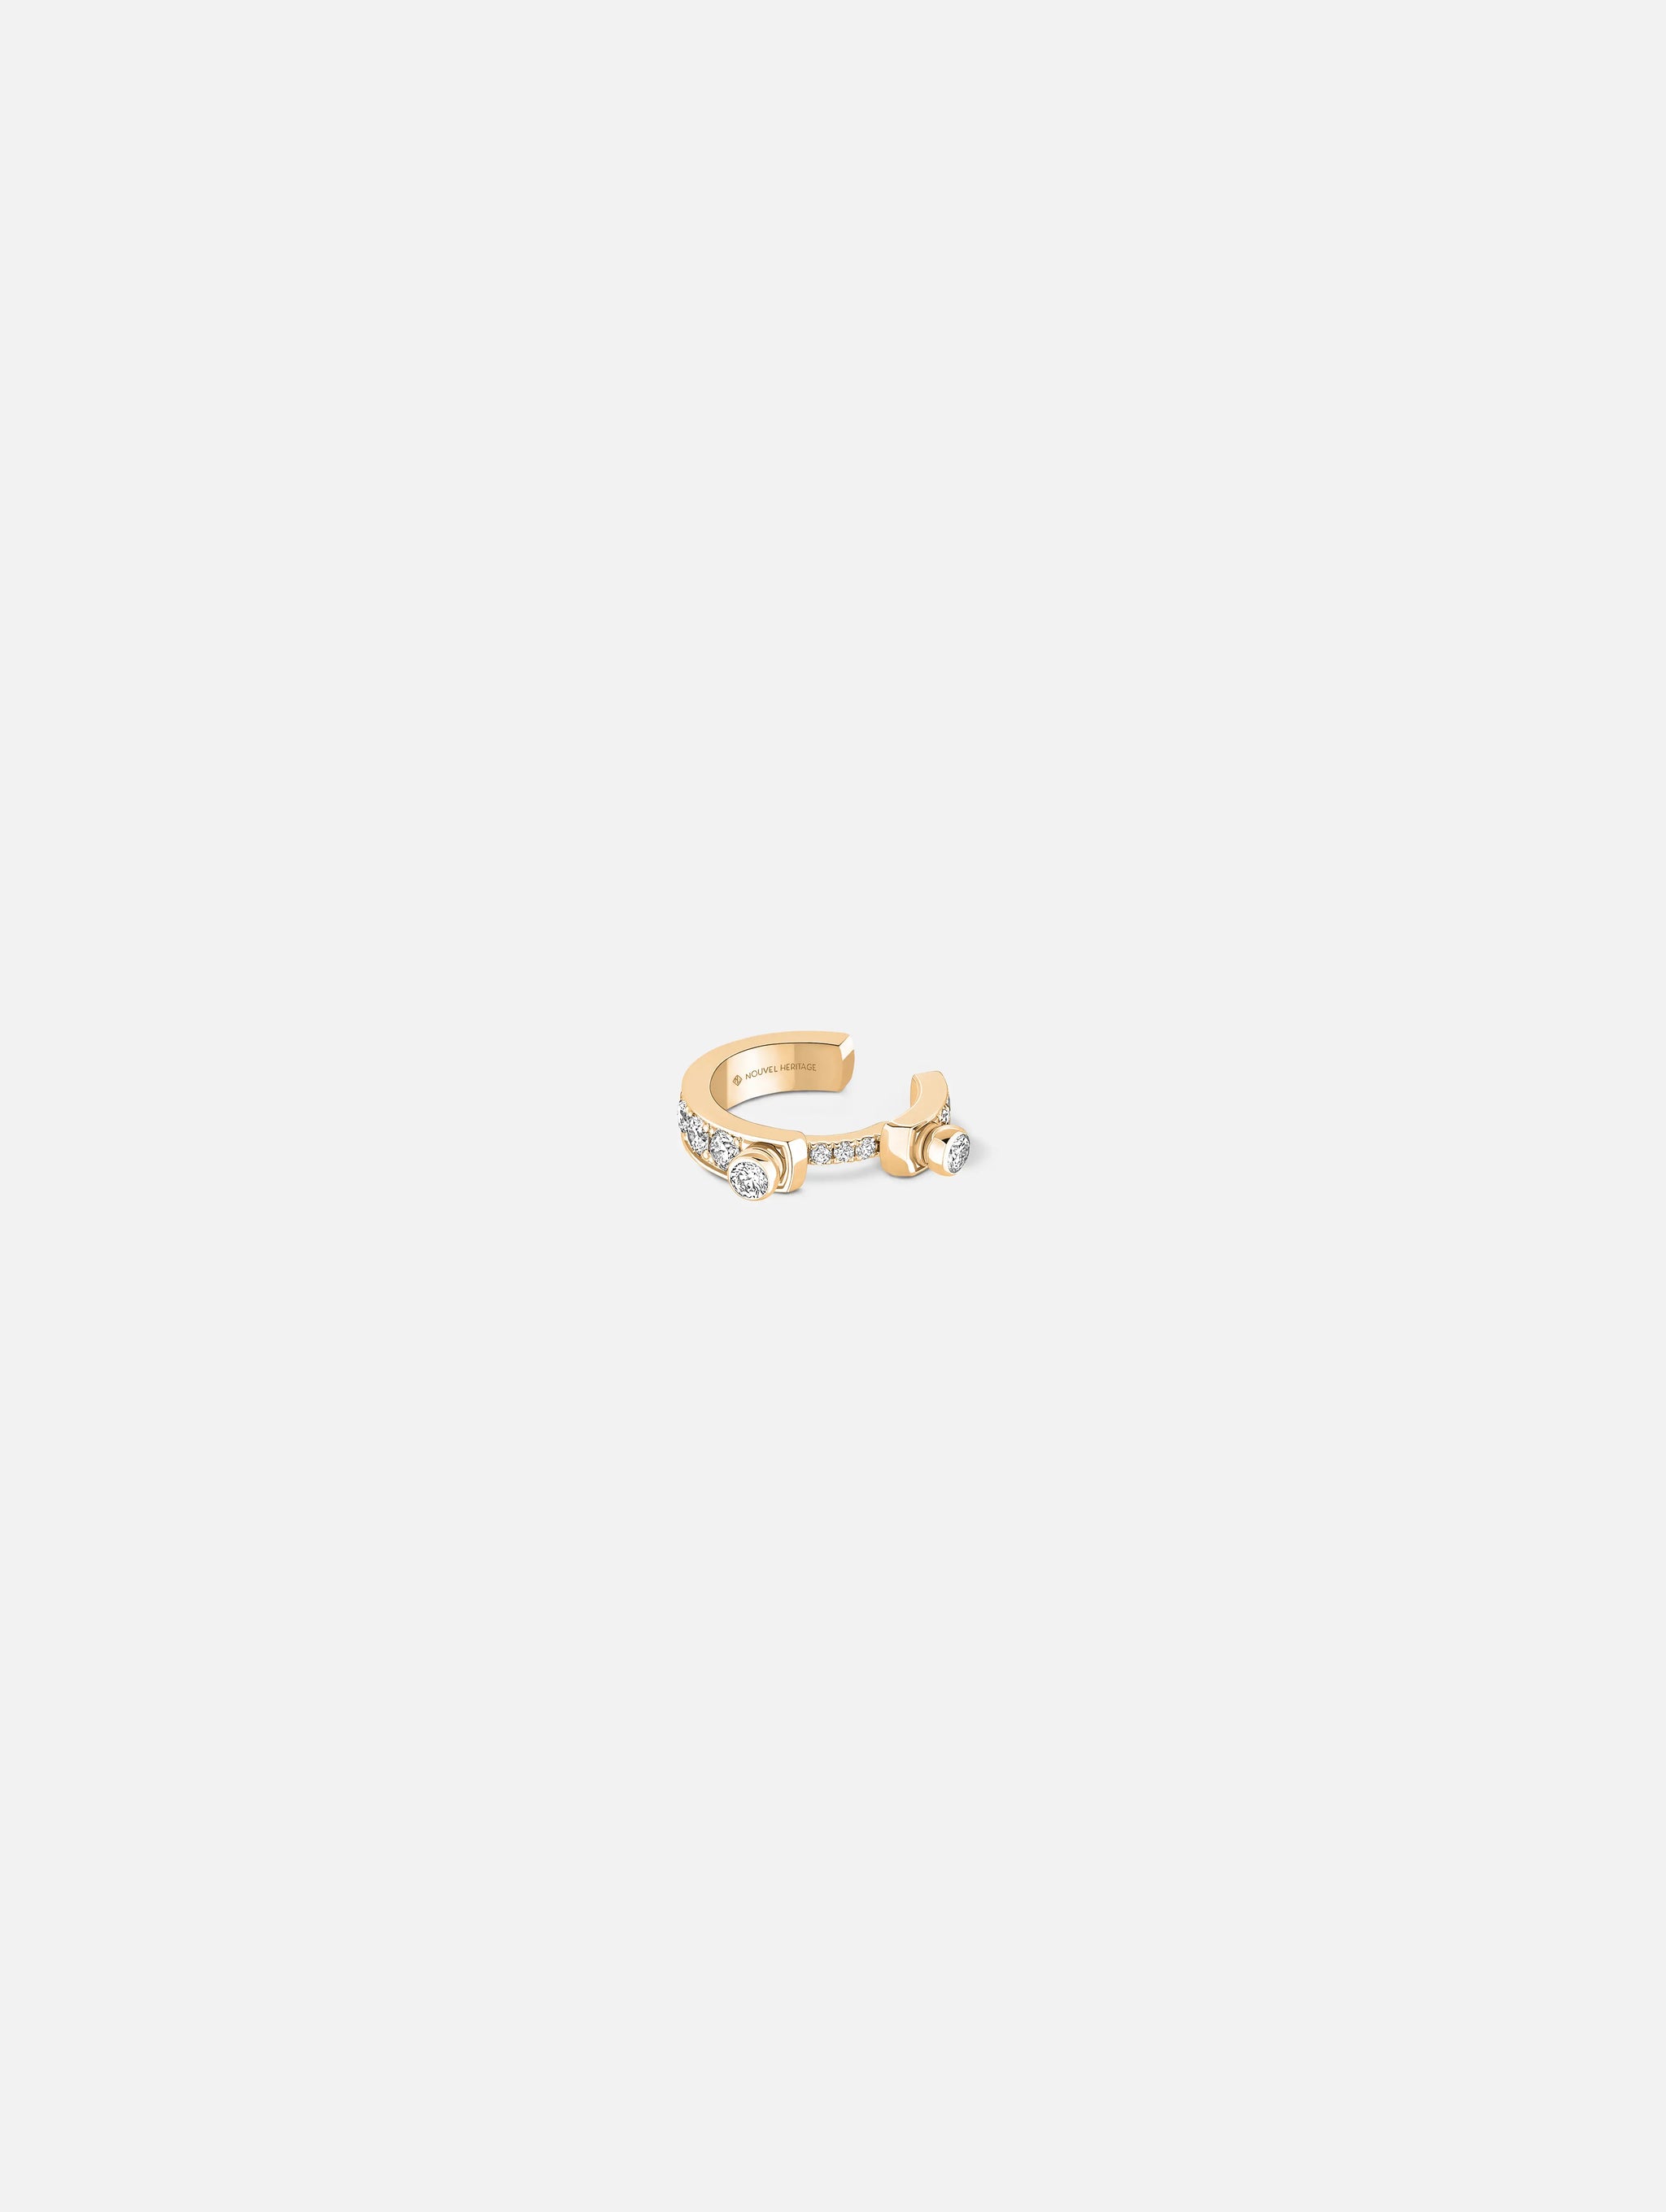 Eternity Tuxedo Ear Cuff in Yellow Gold - 1 - Nouvel Heritage